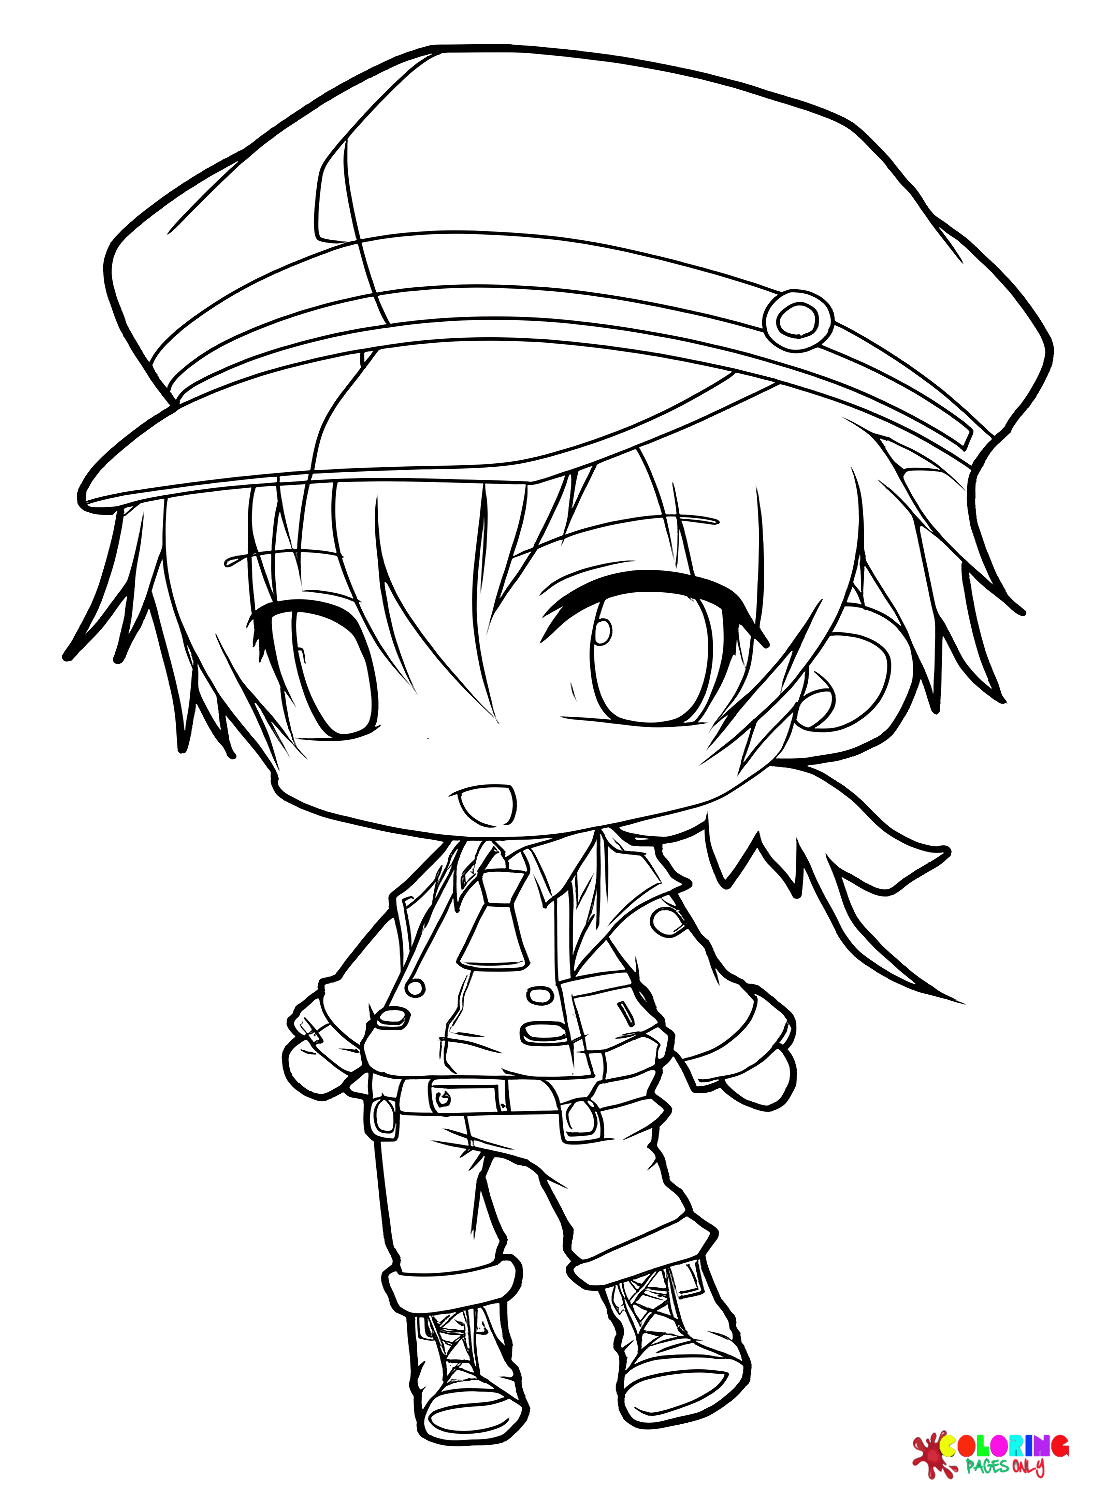 Chibi Naoto Fuyumine aus Dogs: Bullets And Carnage